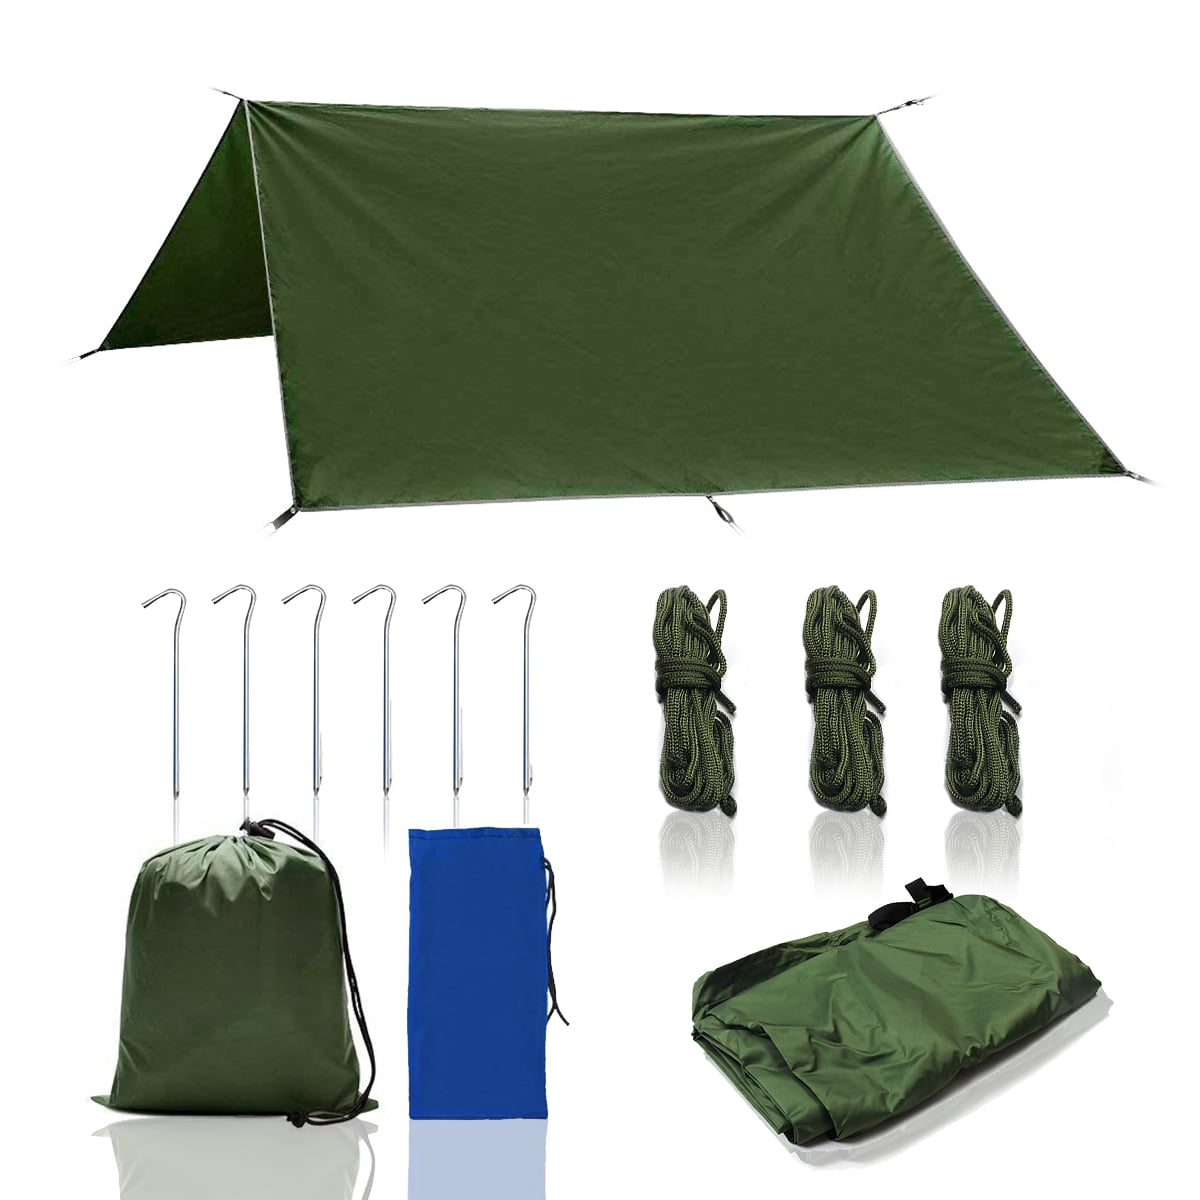 Great for Hiking Backpacking & Travel Use for Shelter Or Sunshade Perfect Tent Cover Or Hammock Rain Fly Waterproof Rip Resistant Camping Tarp for Any Weather